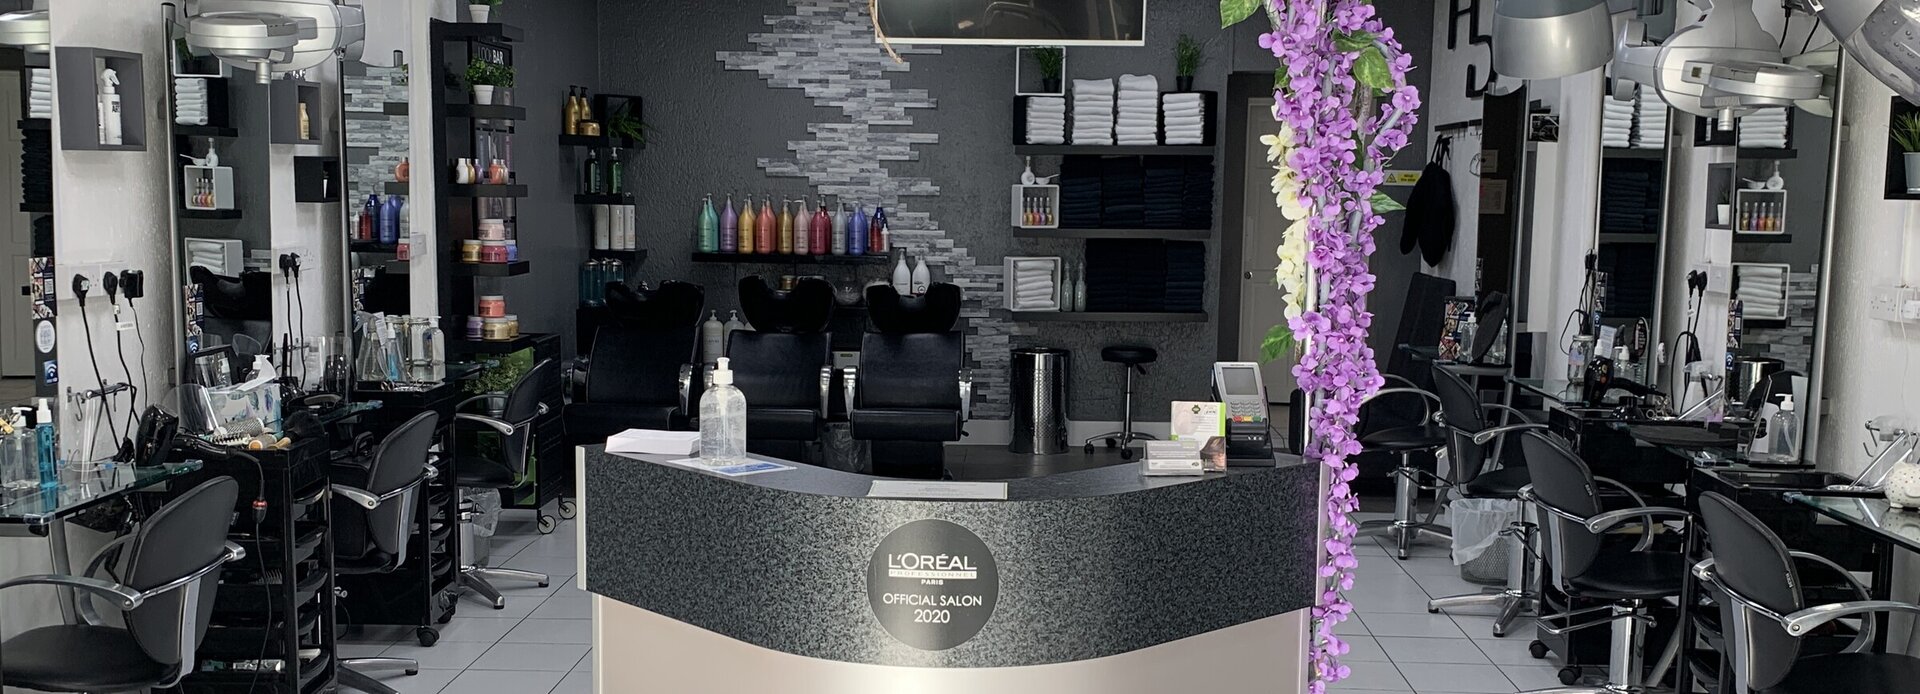 The Hairdressers | Unisex Hairdressers in Hayes